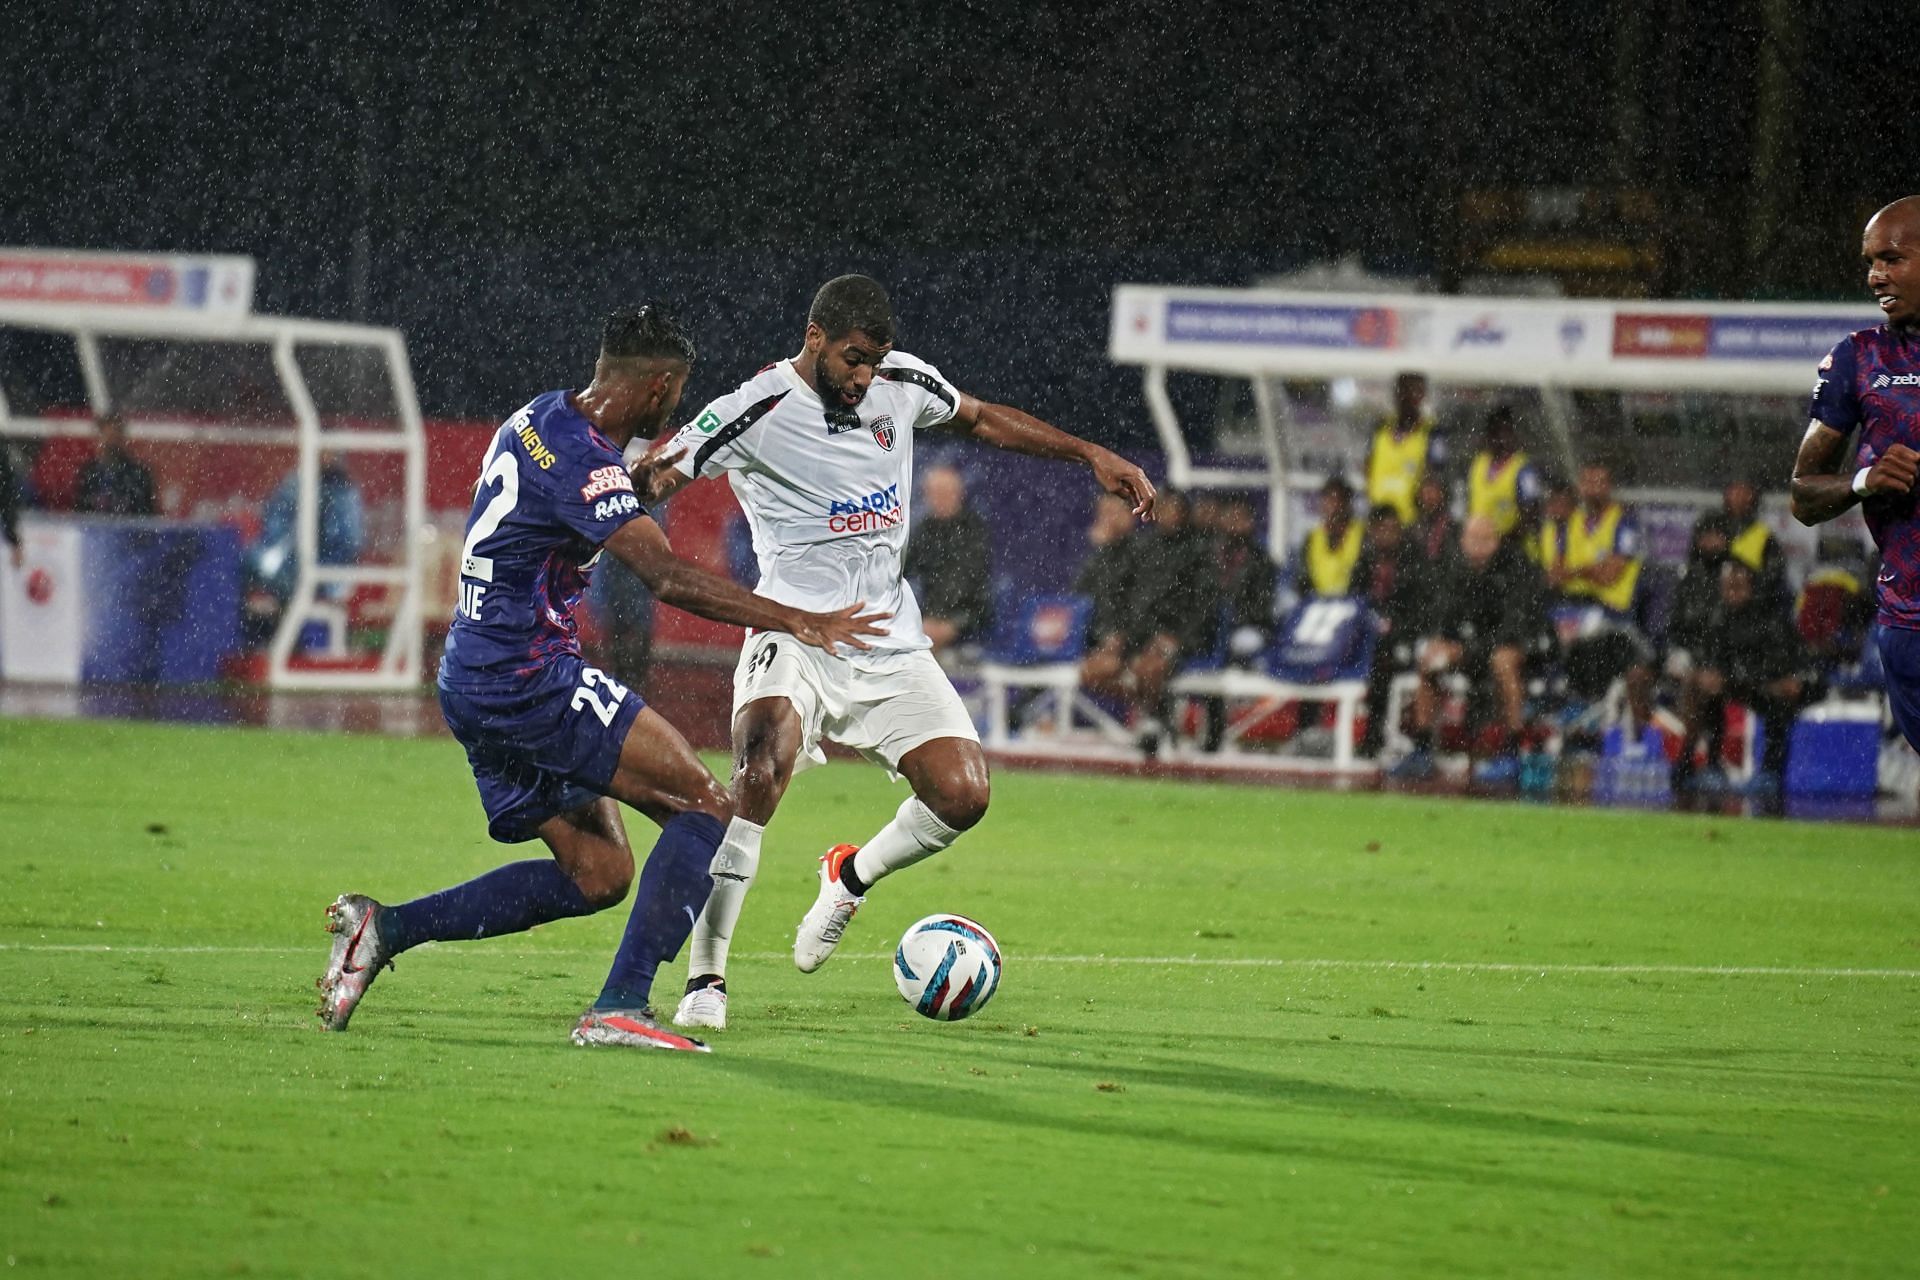 Bengaluru FC player trying to win the ball from NorthEast United FC player during an ISL game - Image: NEUFC Twitter